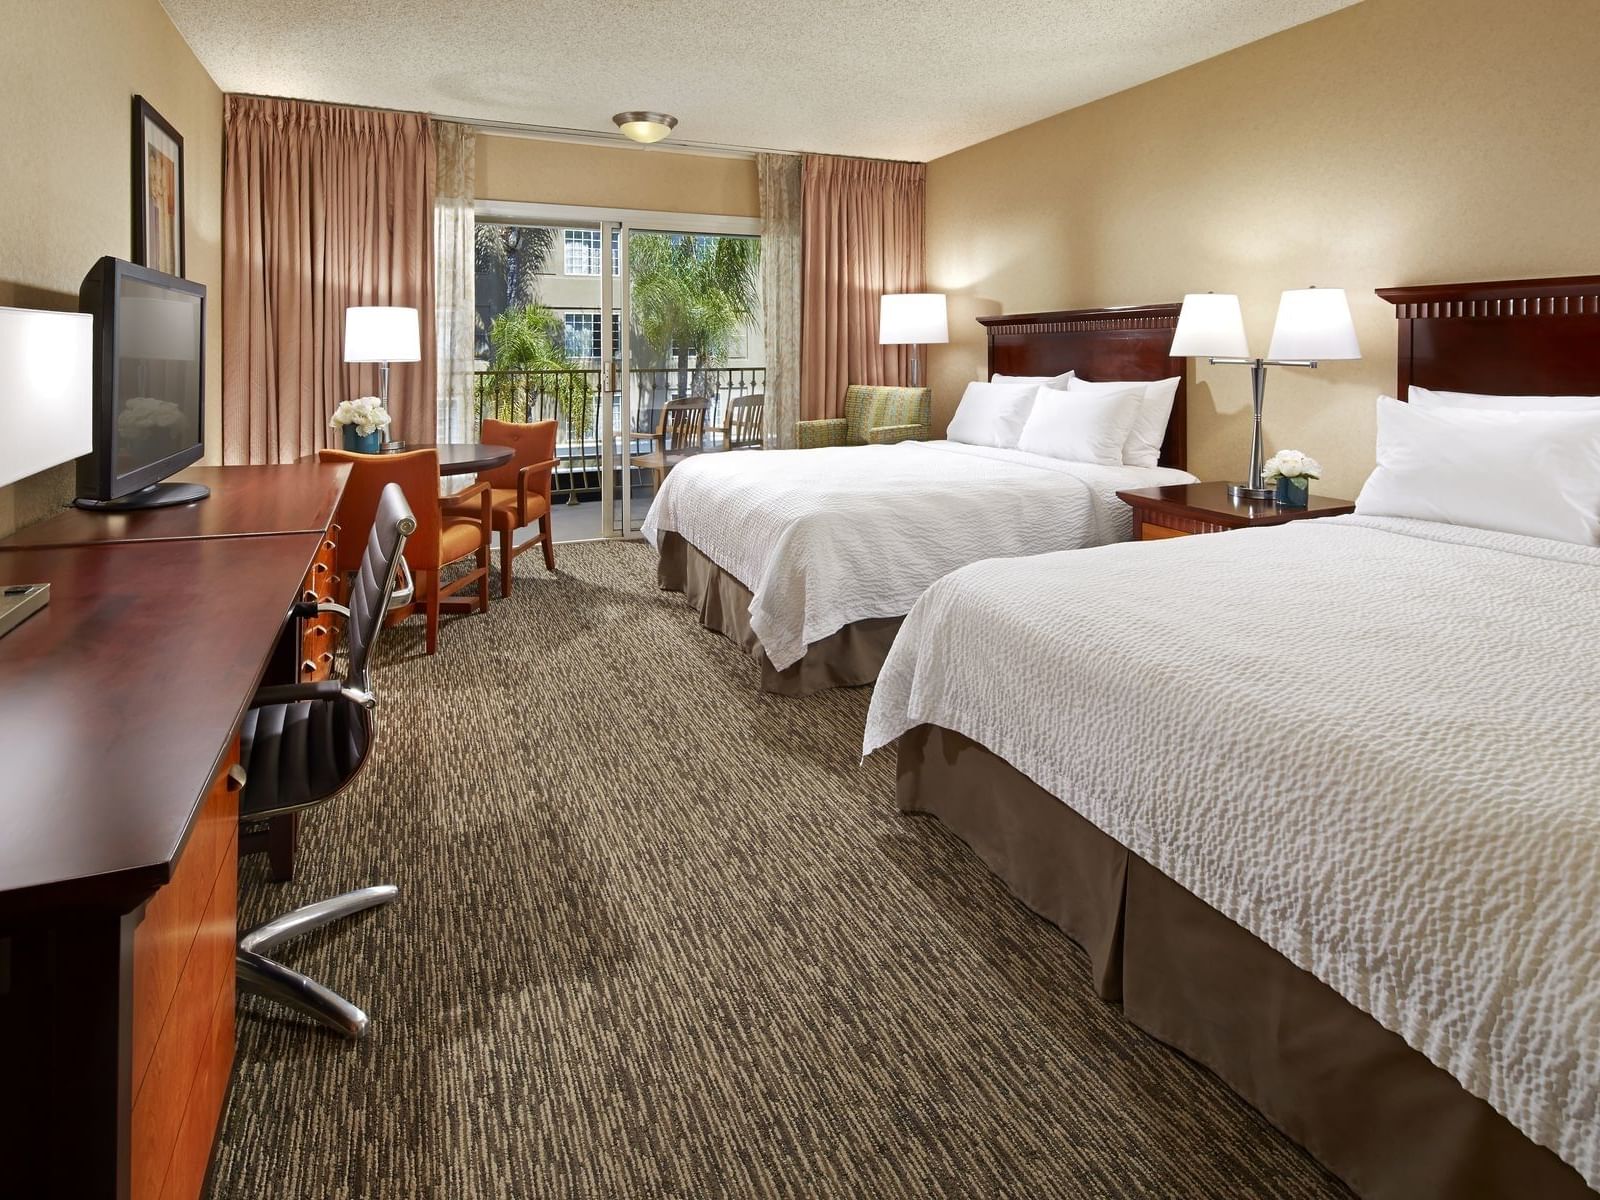 Two beds & furniture in a bedroom at Anaheim Portofino Inn